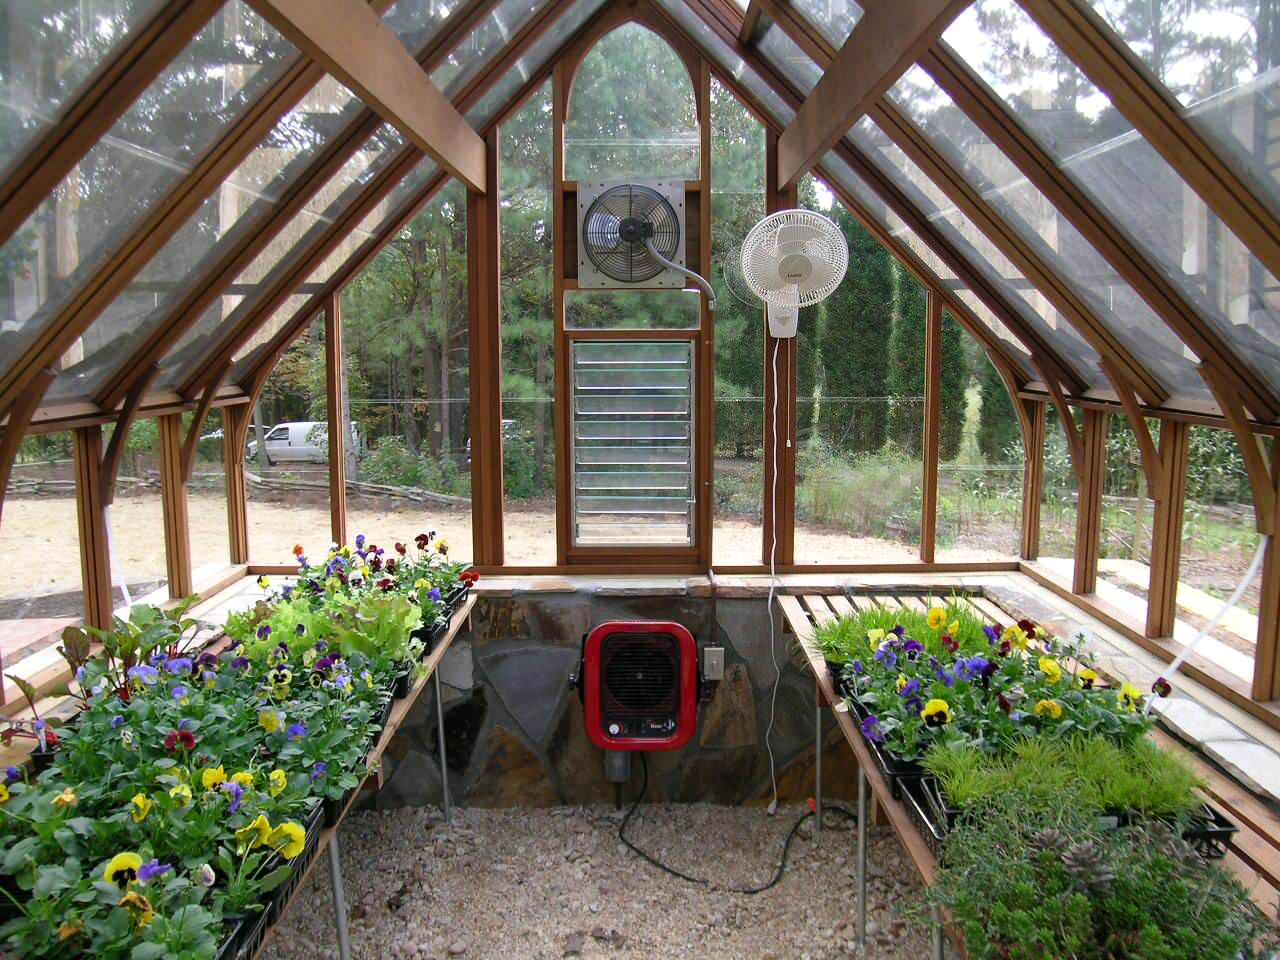 75 Greenhouse Ideas You'Ll Love - May, 2023 | Houzz